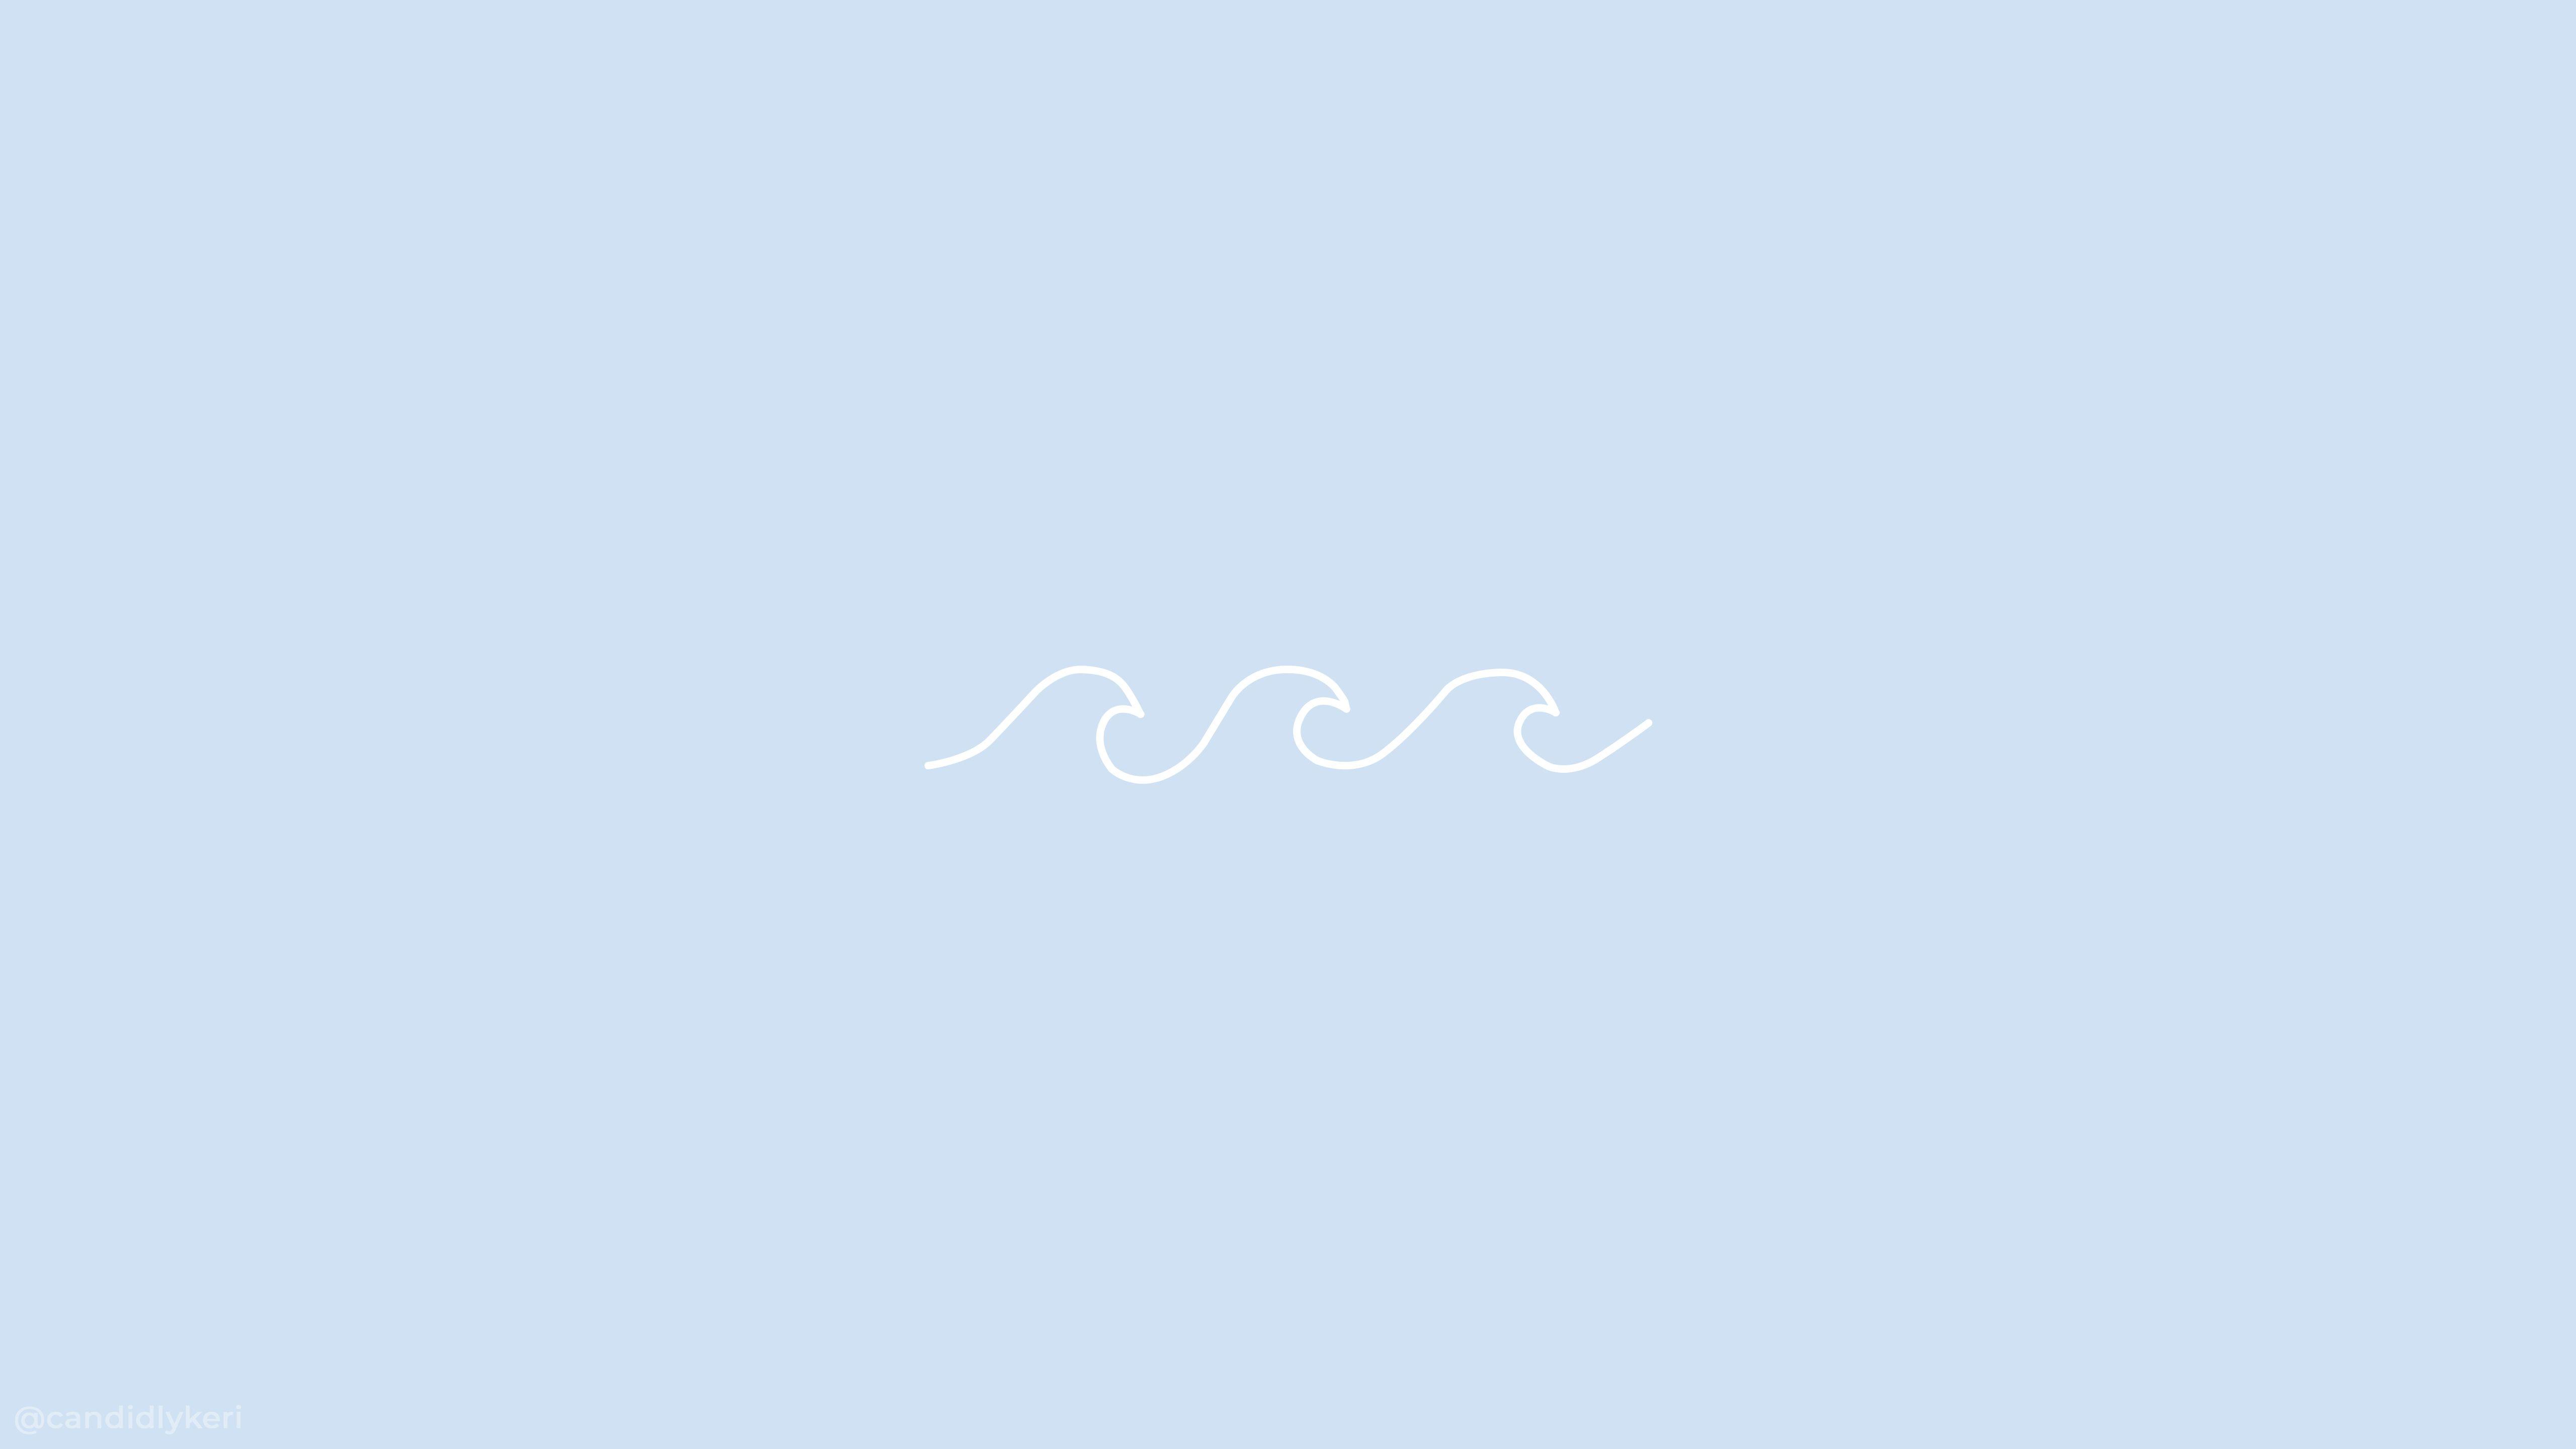 Minimalistic white wave icon on a blue background - MacBook